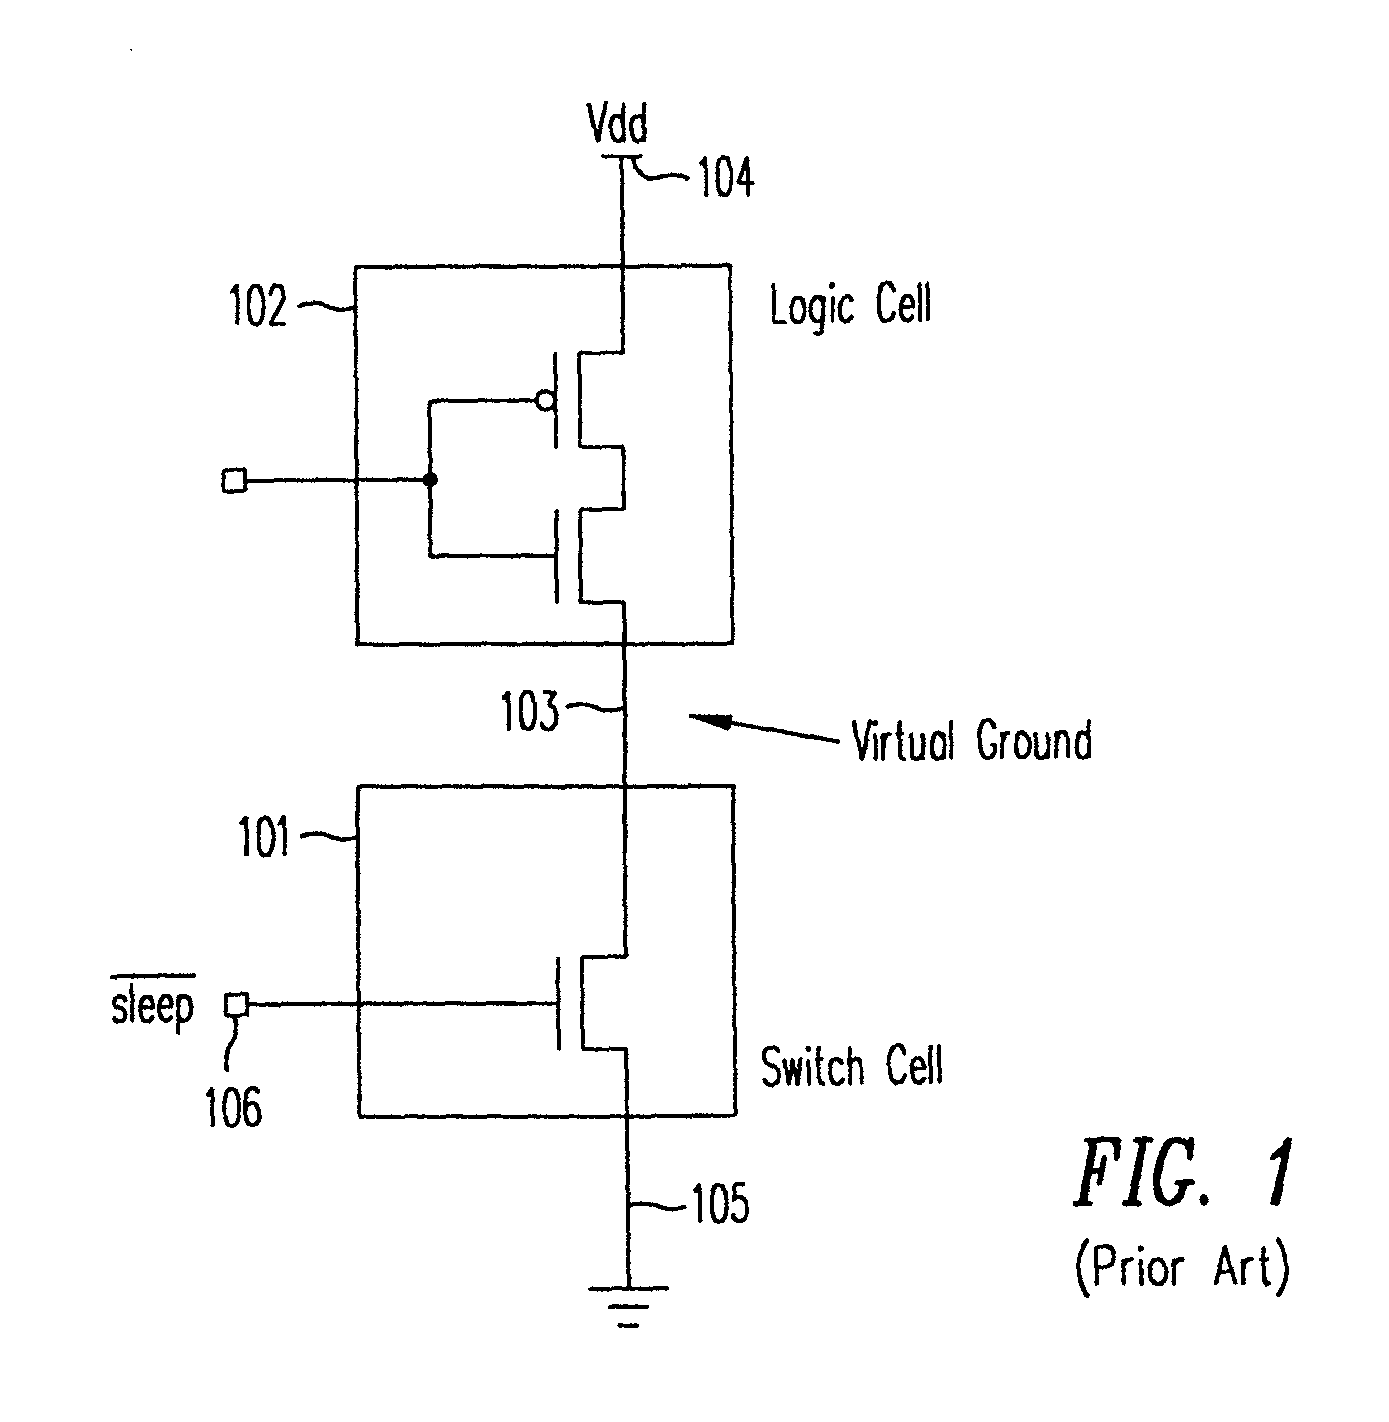 Method that allows flexible evaluation of power-gated circuits